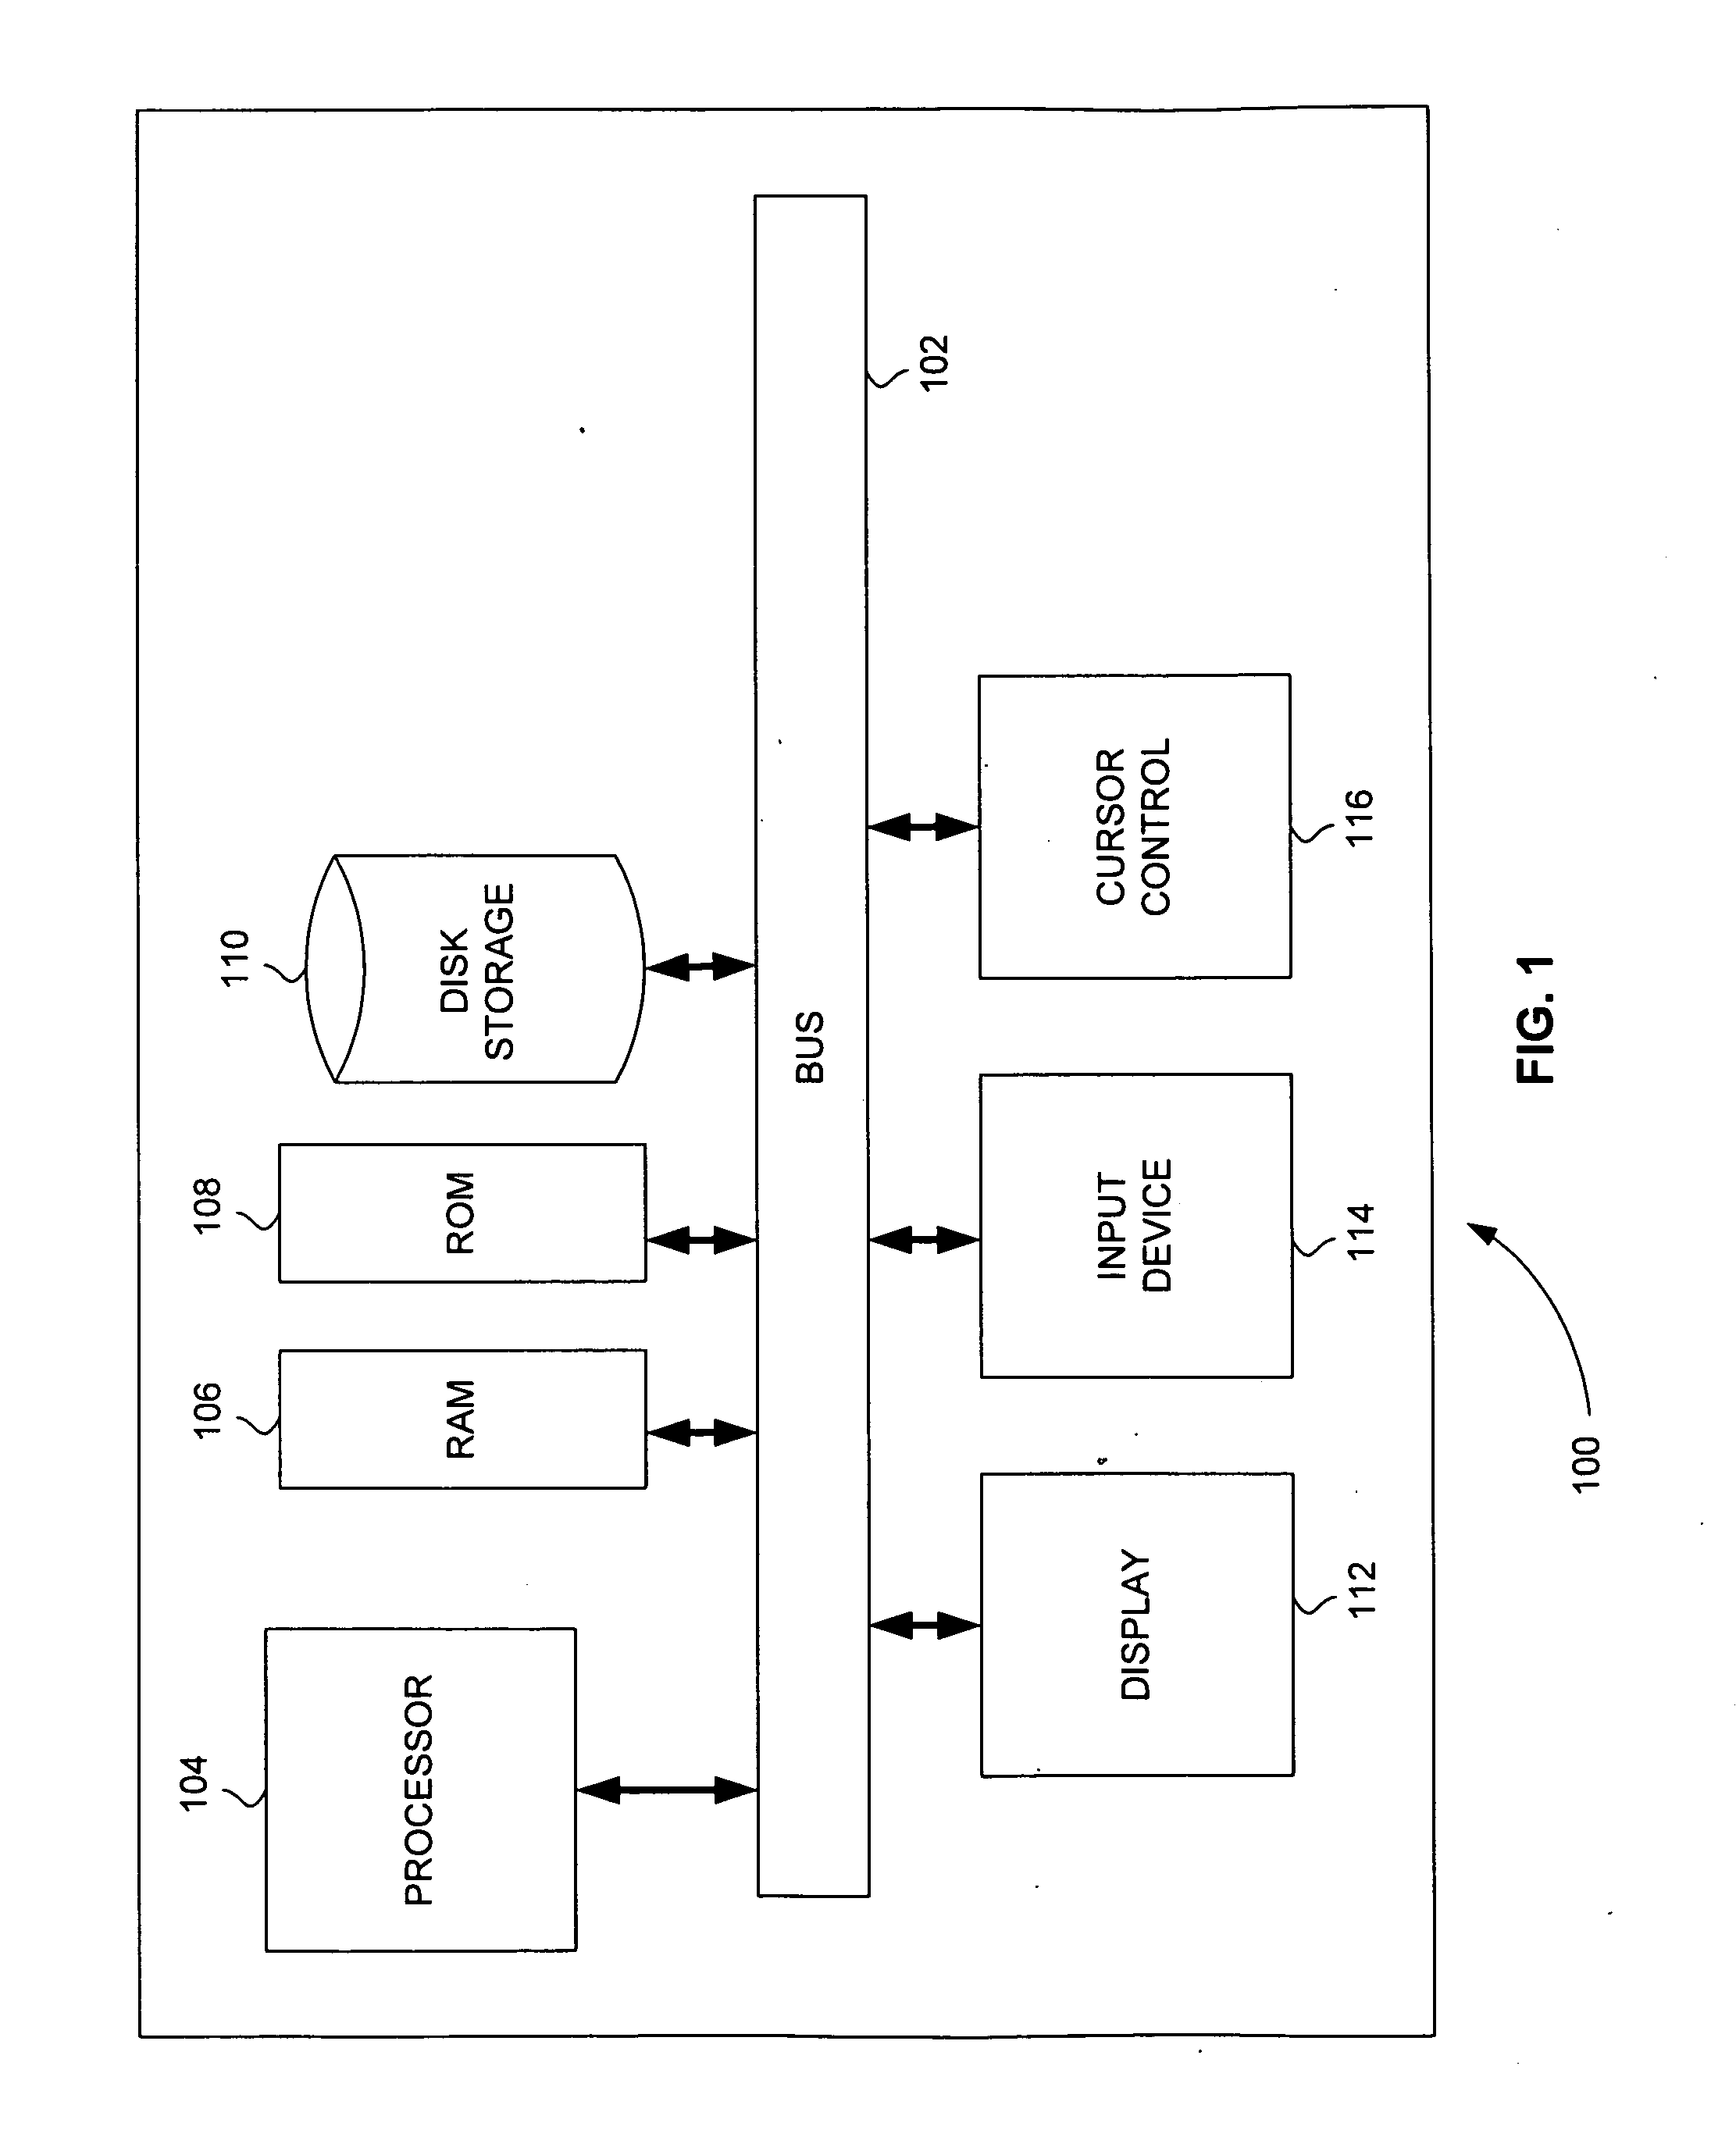 Intelligent saturation control for compound specific optimization of mrm